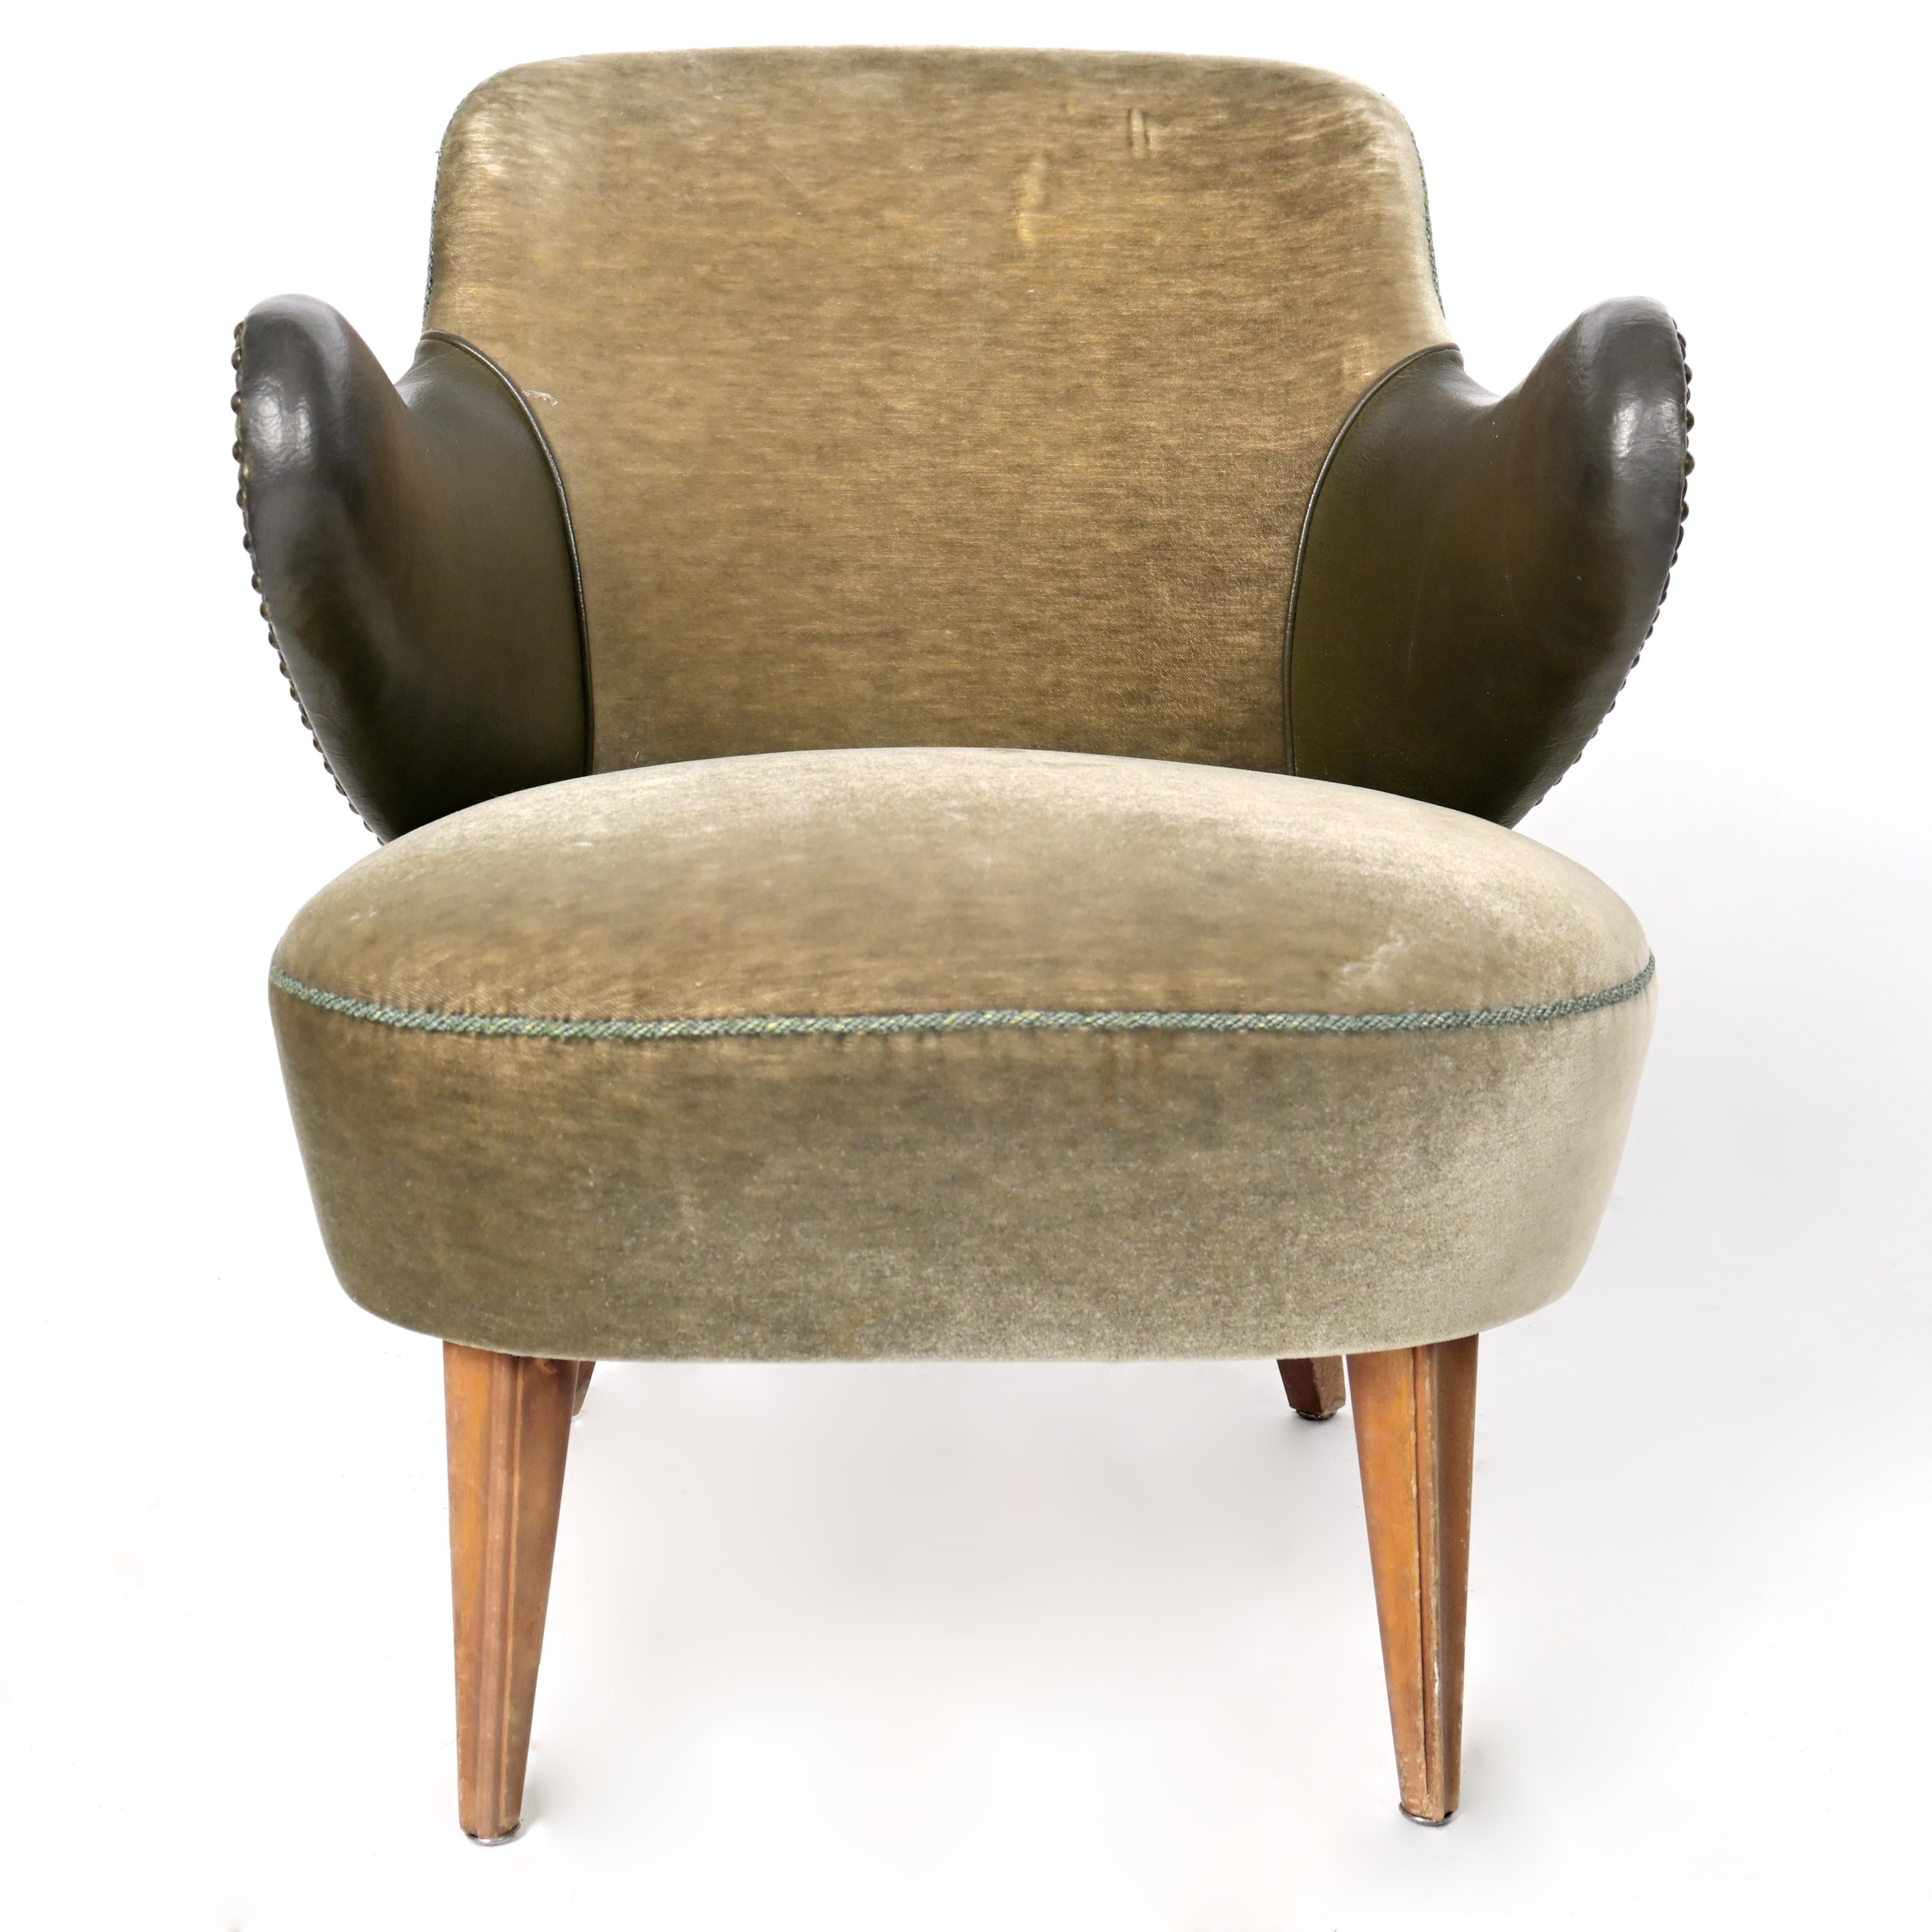 A pair of mix material armchairs. Made with textile fabric with faux leather welted around the upturned curved arms. Rests upon four walnut tapered legs. Circa 1950s. Light stressing and age-related wear in the textile upholstery.
 